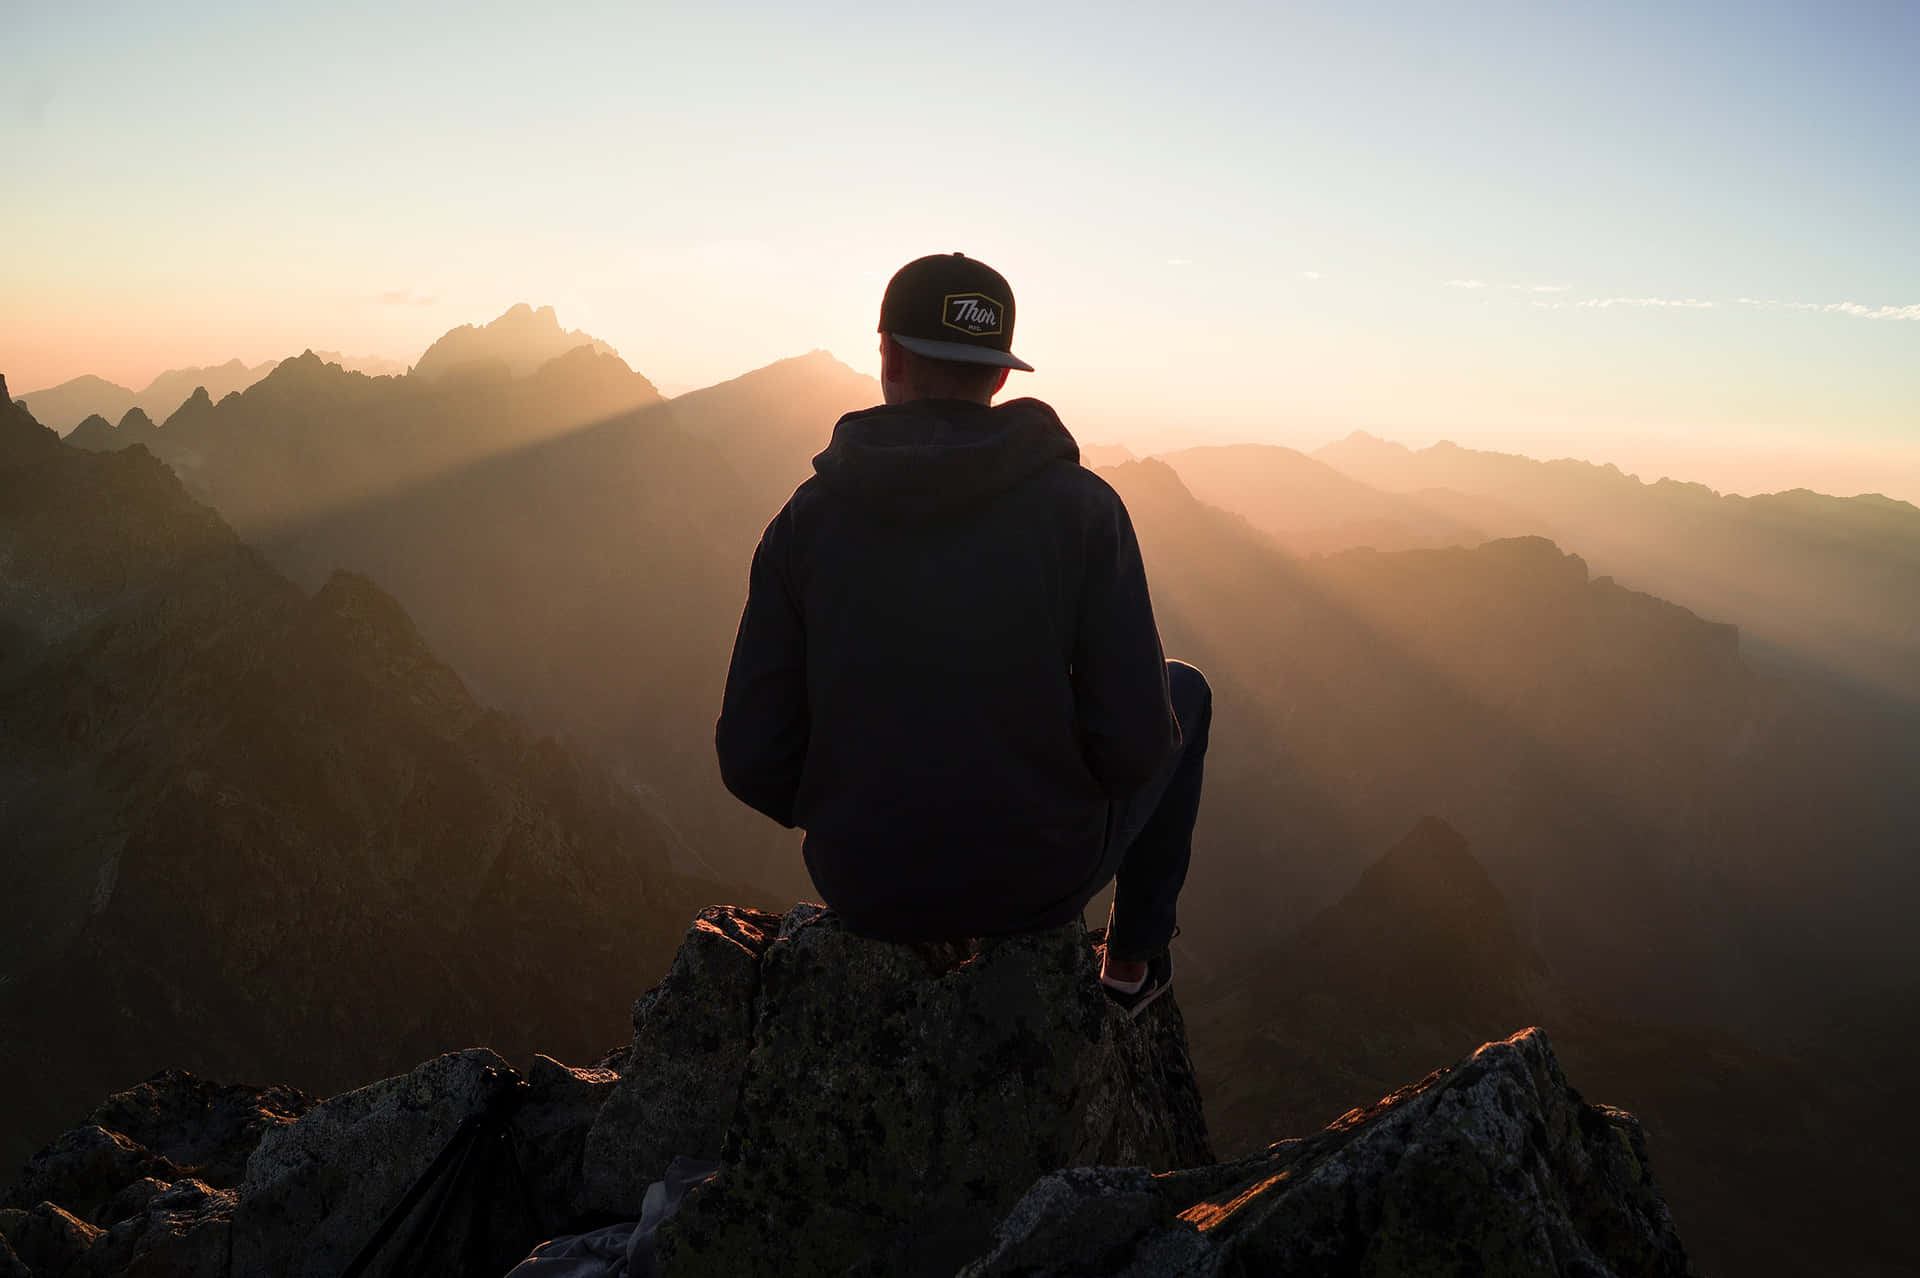 A Man Sitting On Top Of A Mountain At Sunset